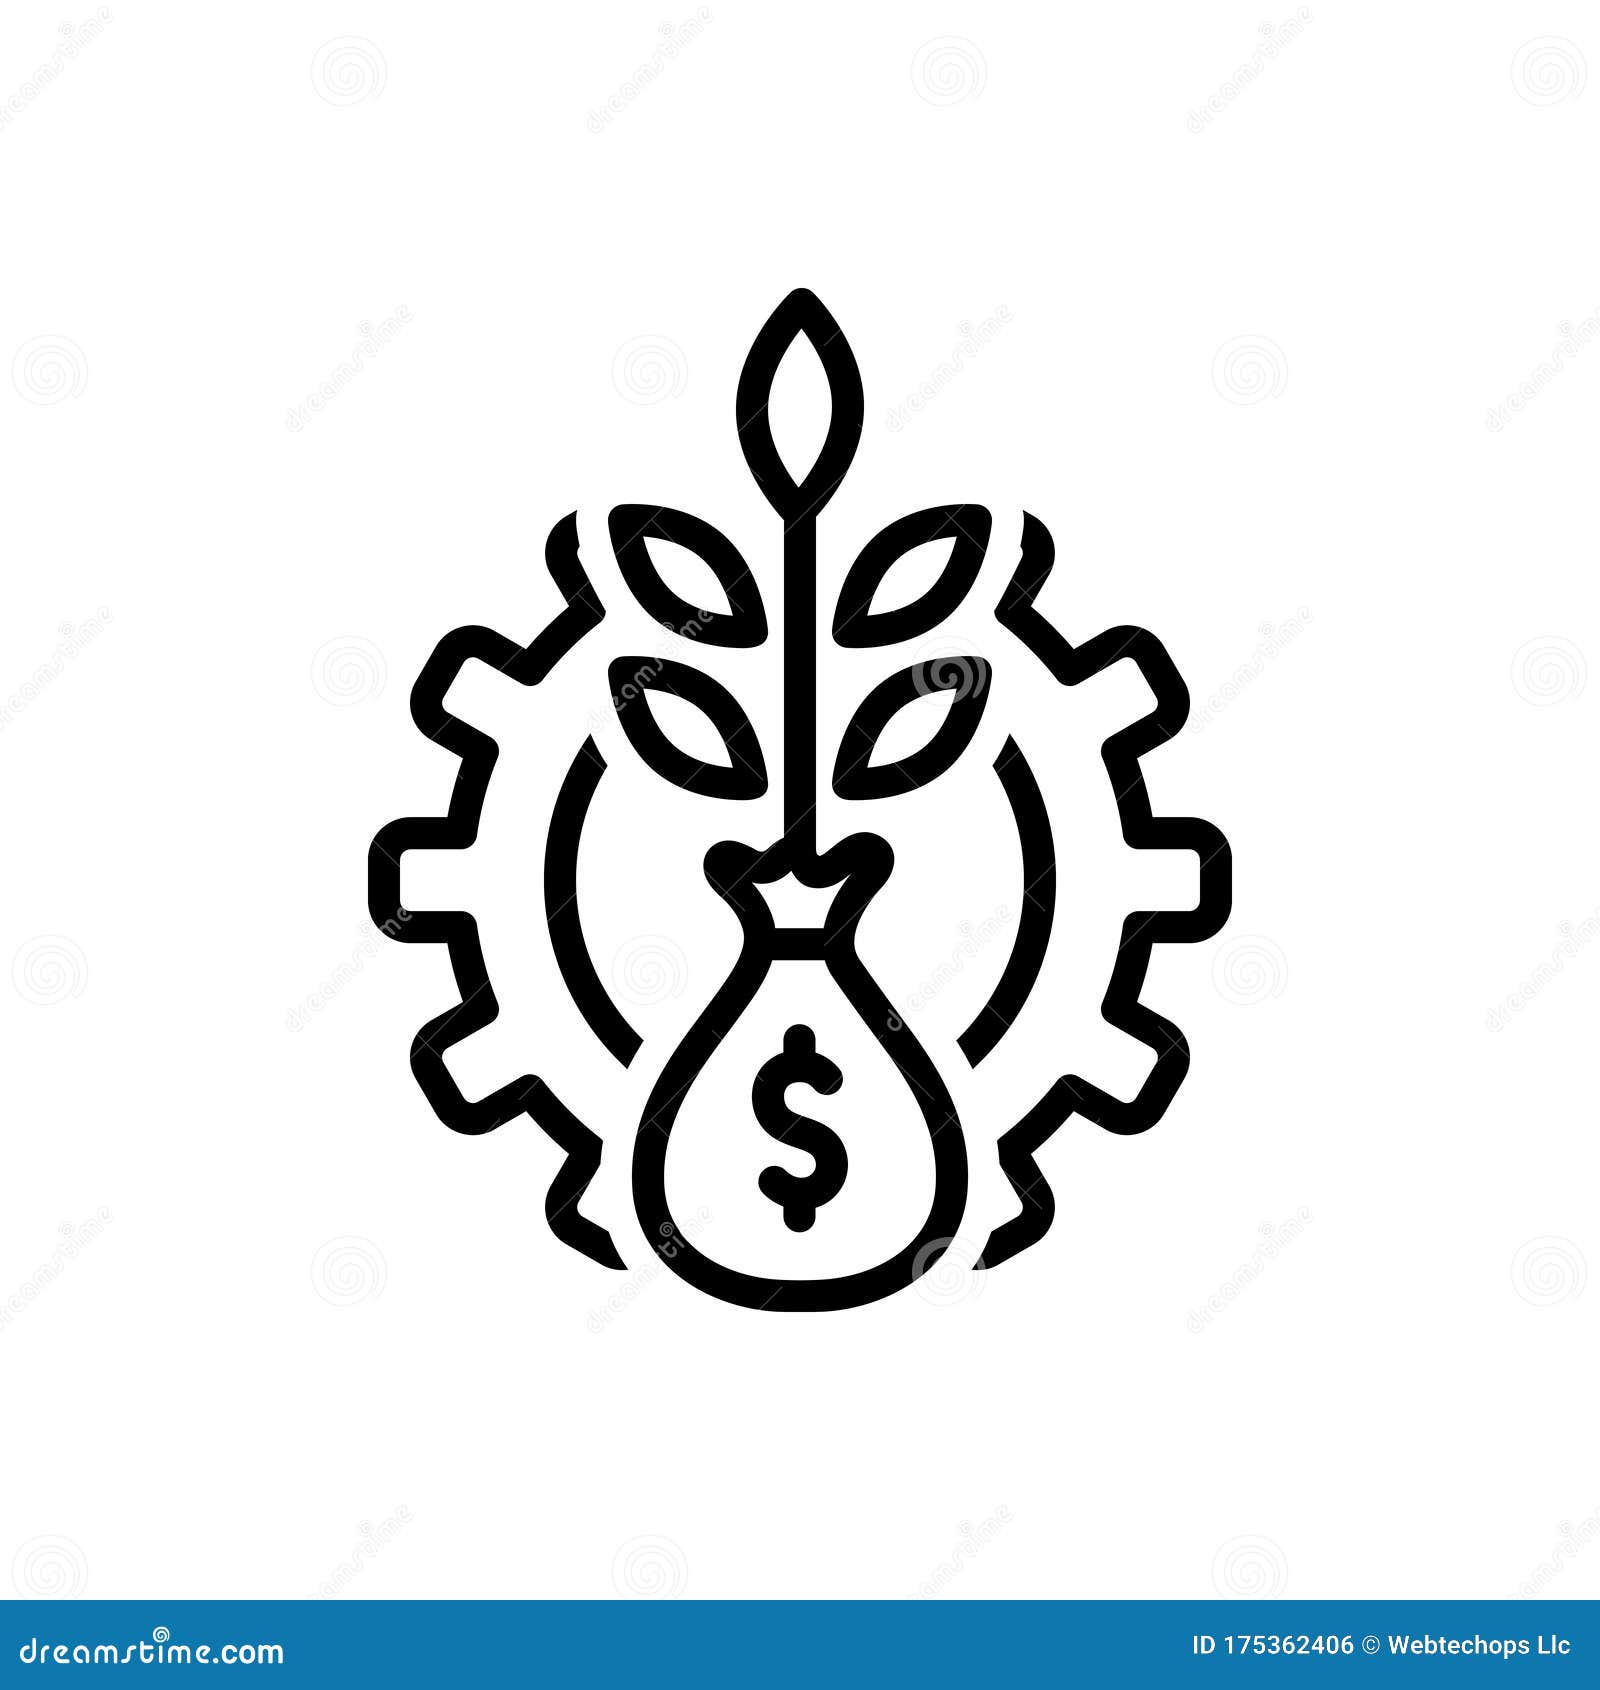 black line icon for financial, pecuniary and investment